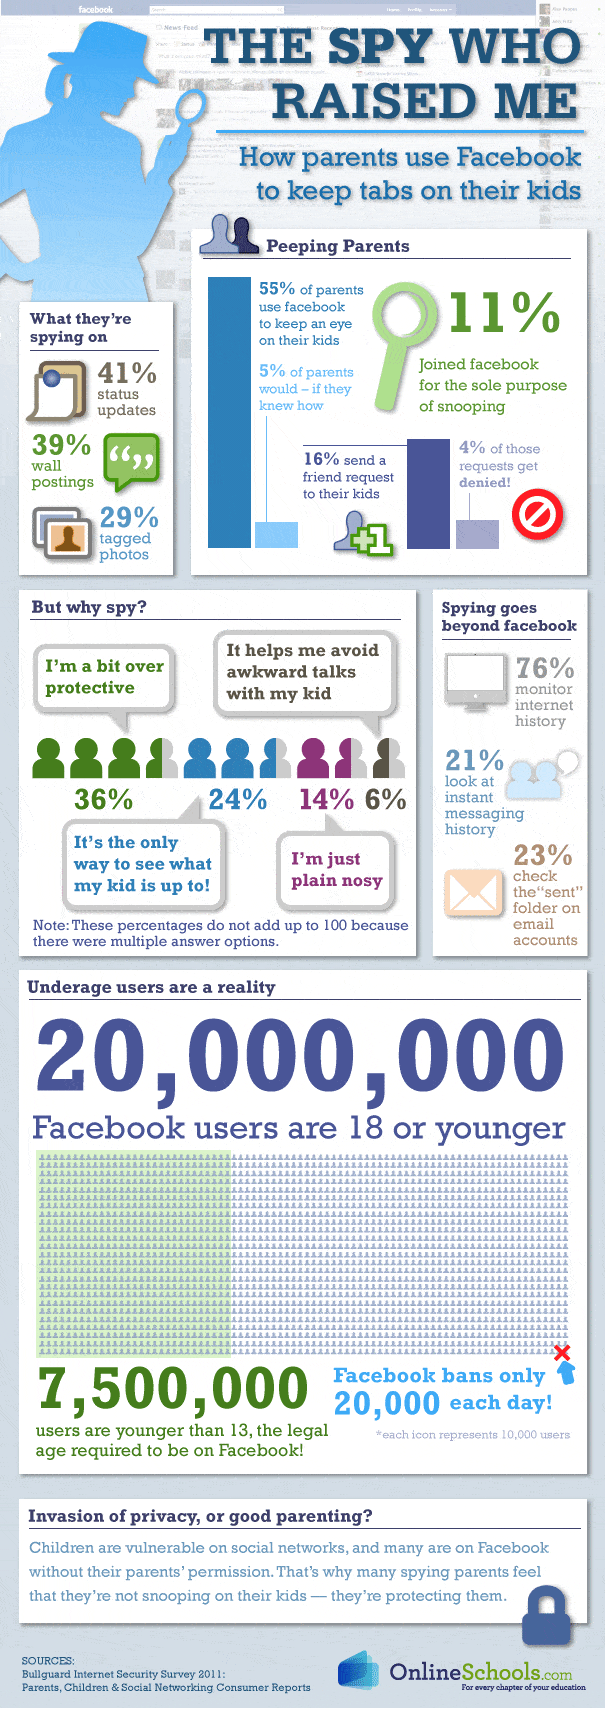 how Parents use Facebook to keep tabs on their kids